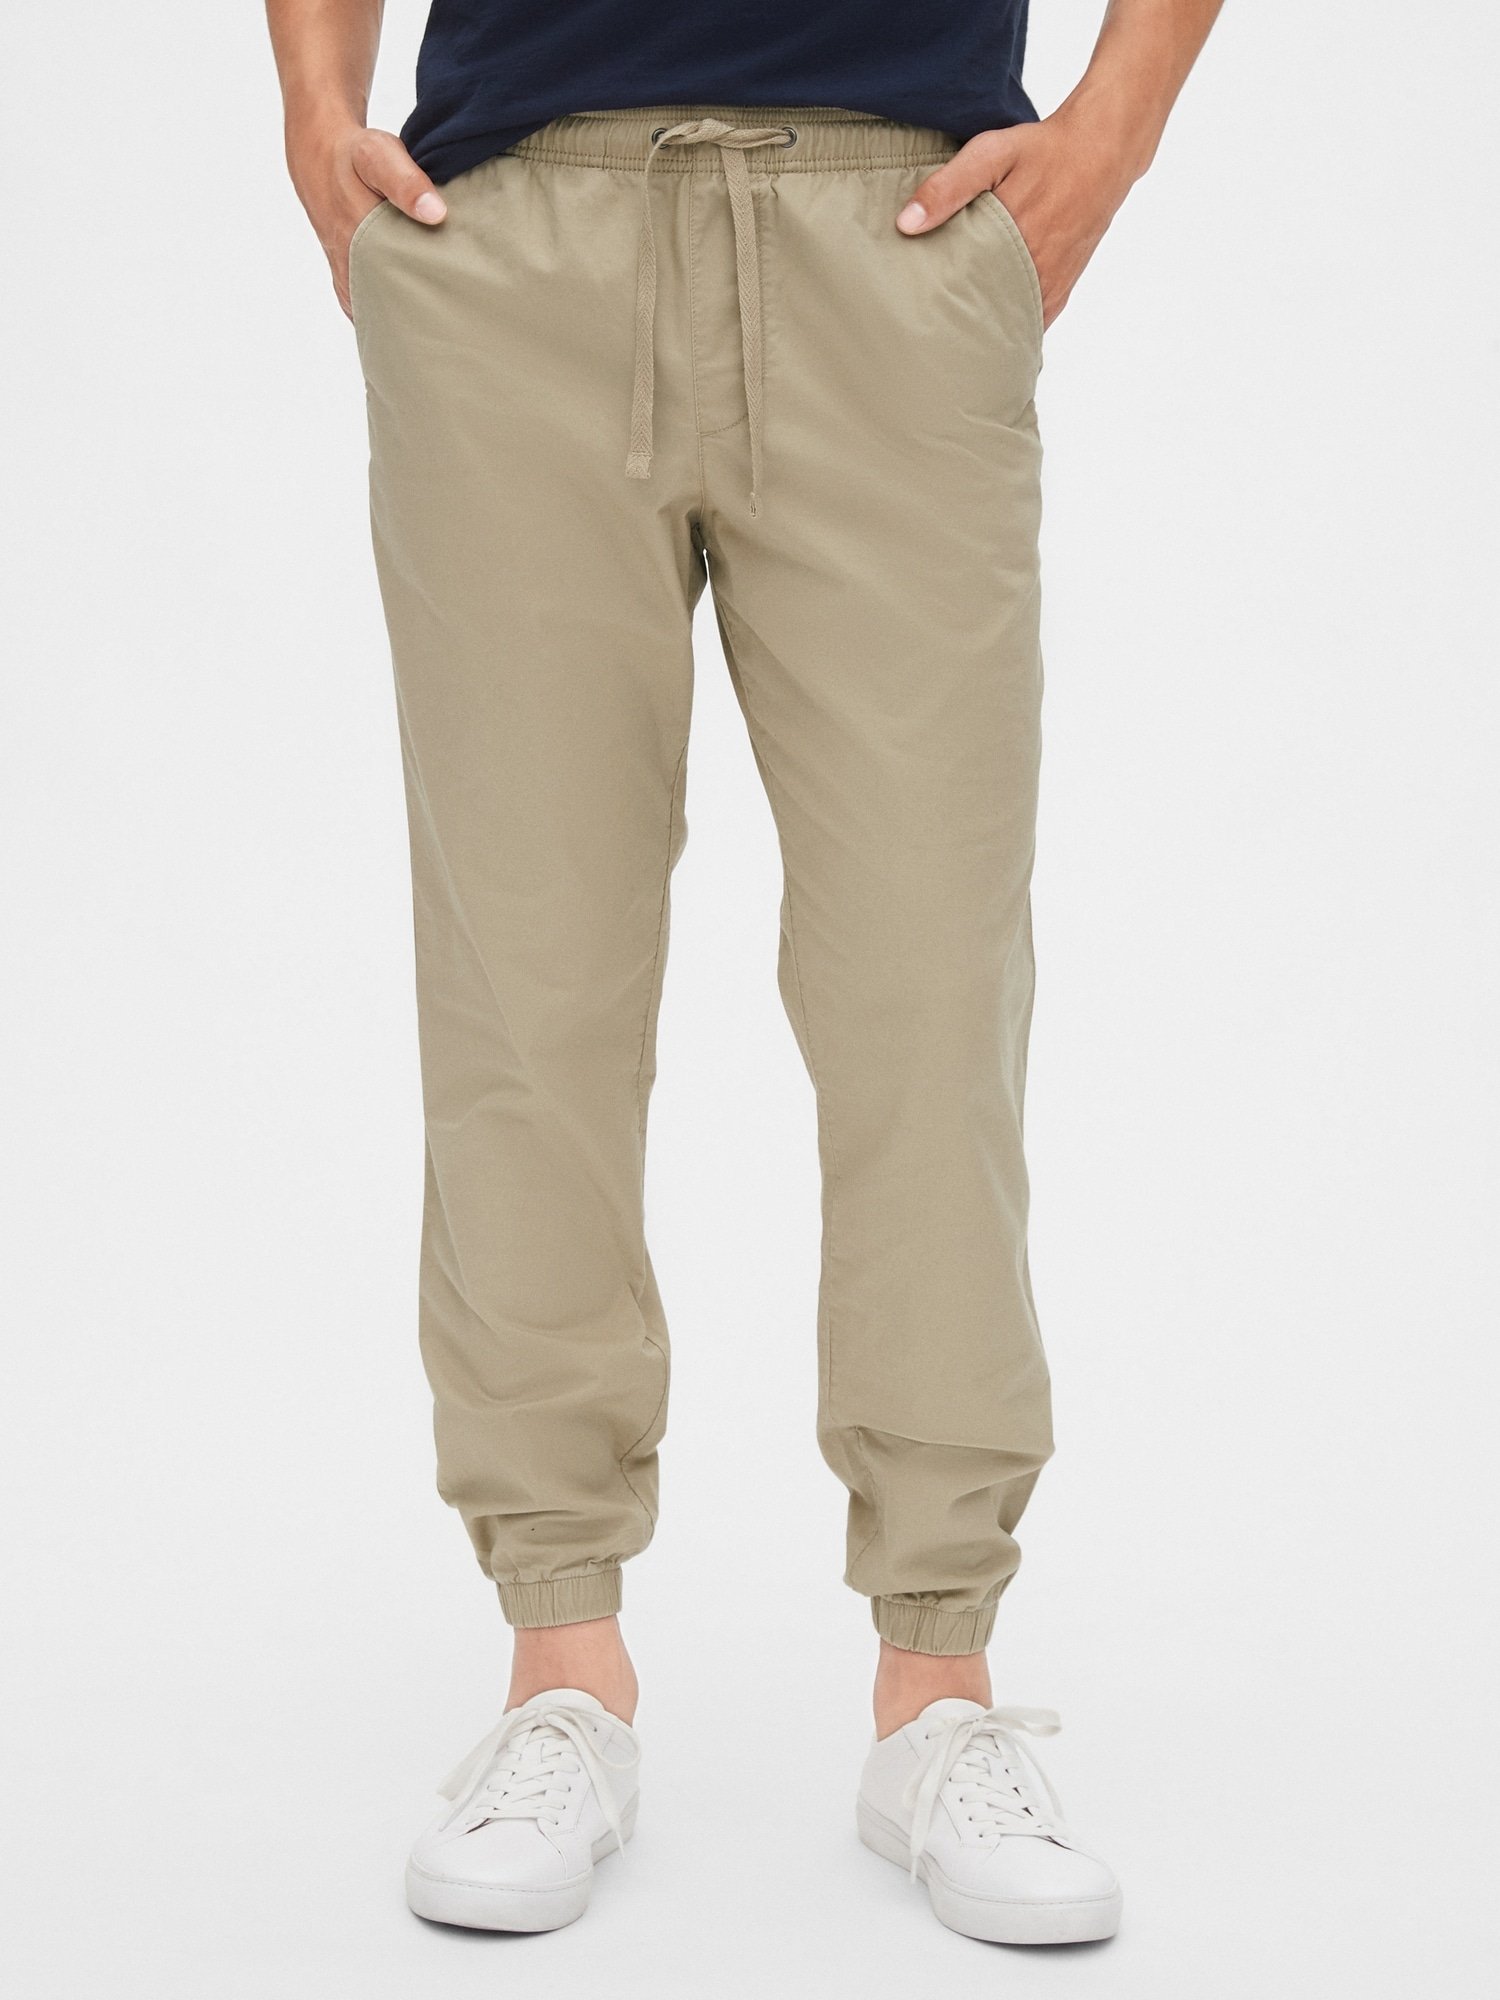 WOVEN JOGGER NEW product image